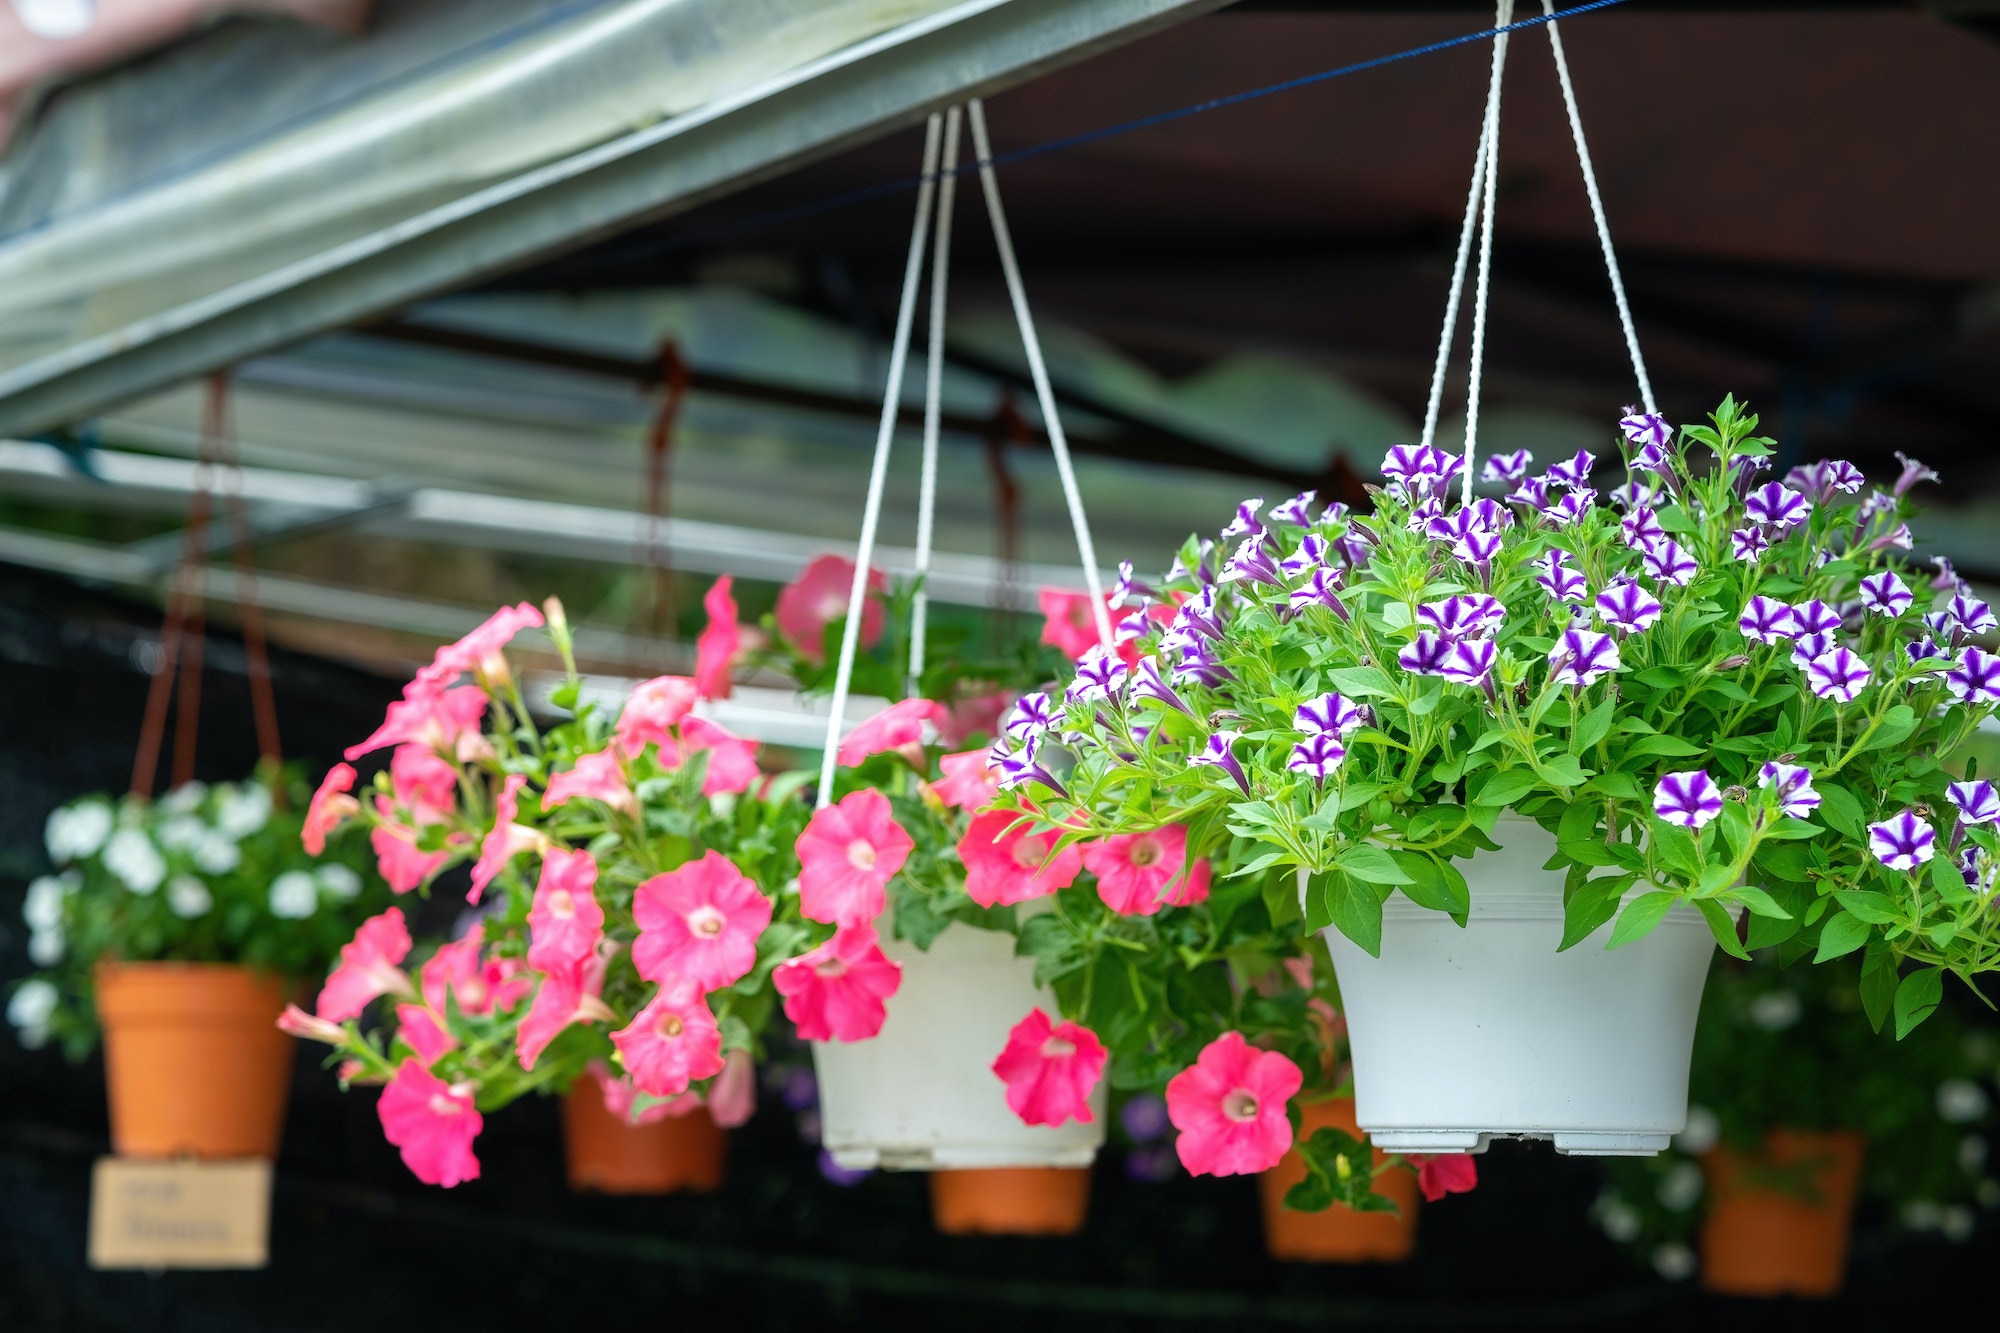 Multicoloured petunias hanging on the flower pot.